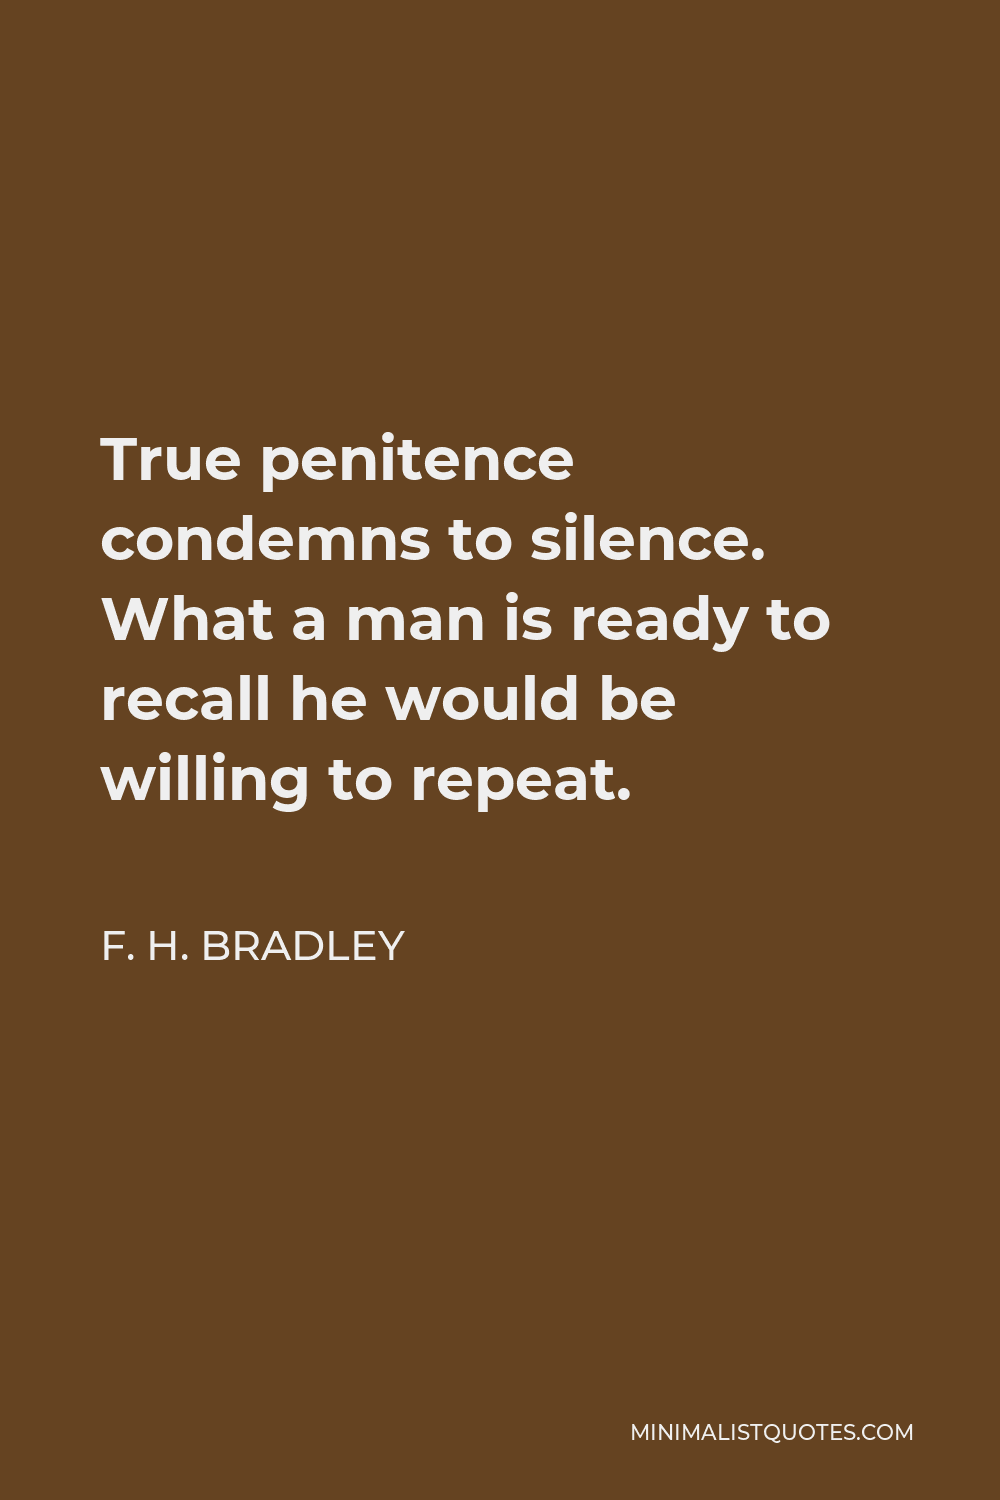 F. H. Bradley Quote - True penitence condemns to silence. What a man is ready to recall he would be willing to repeat.